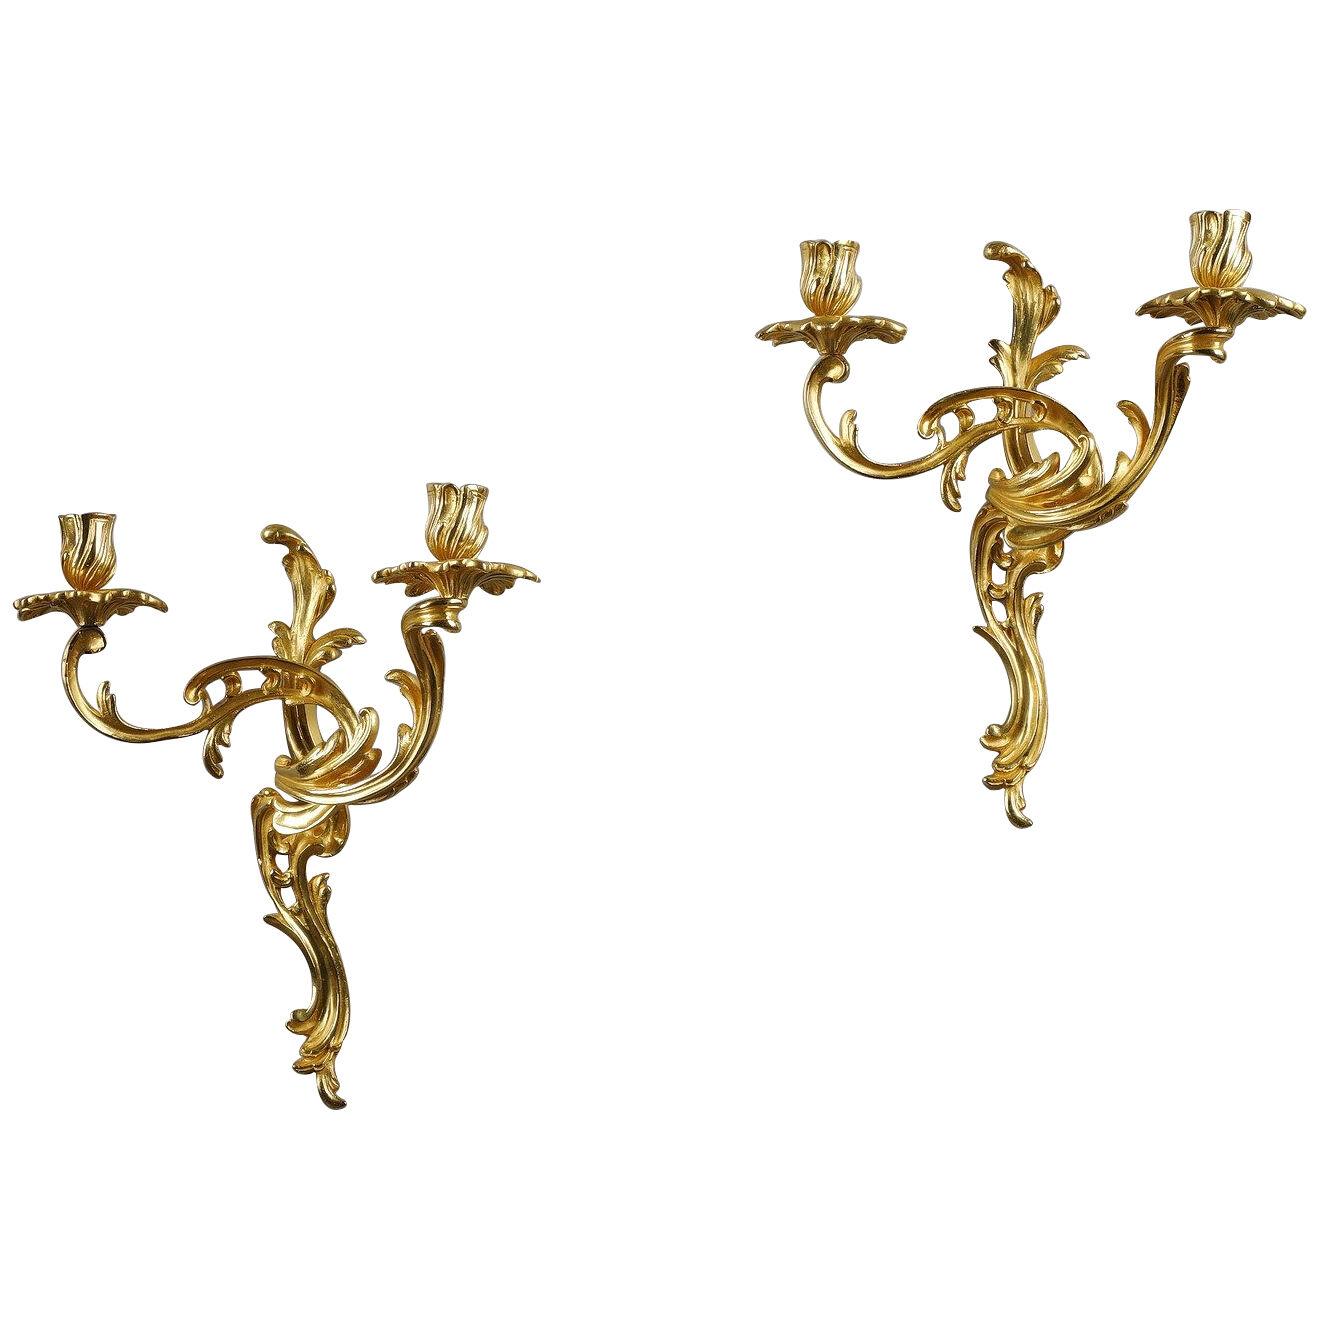 Pair of gilt bronze wall candlesticks in rocaille style